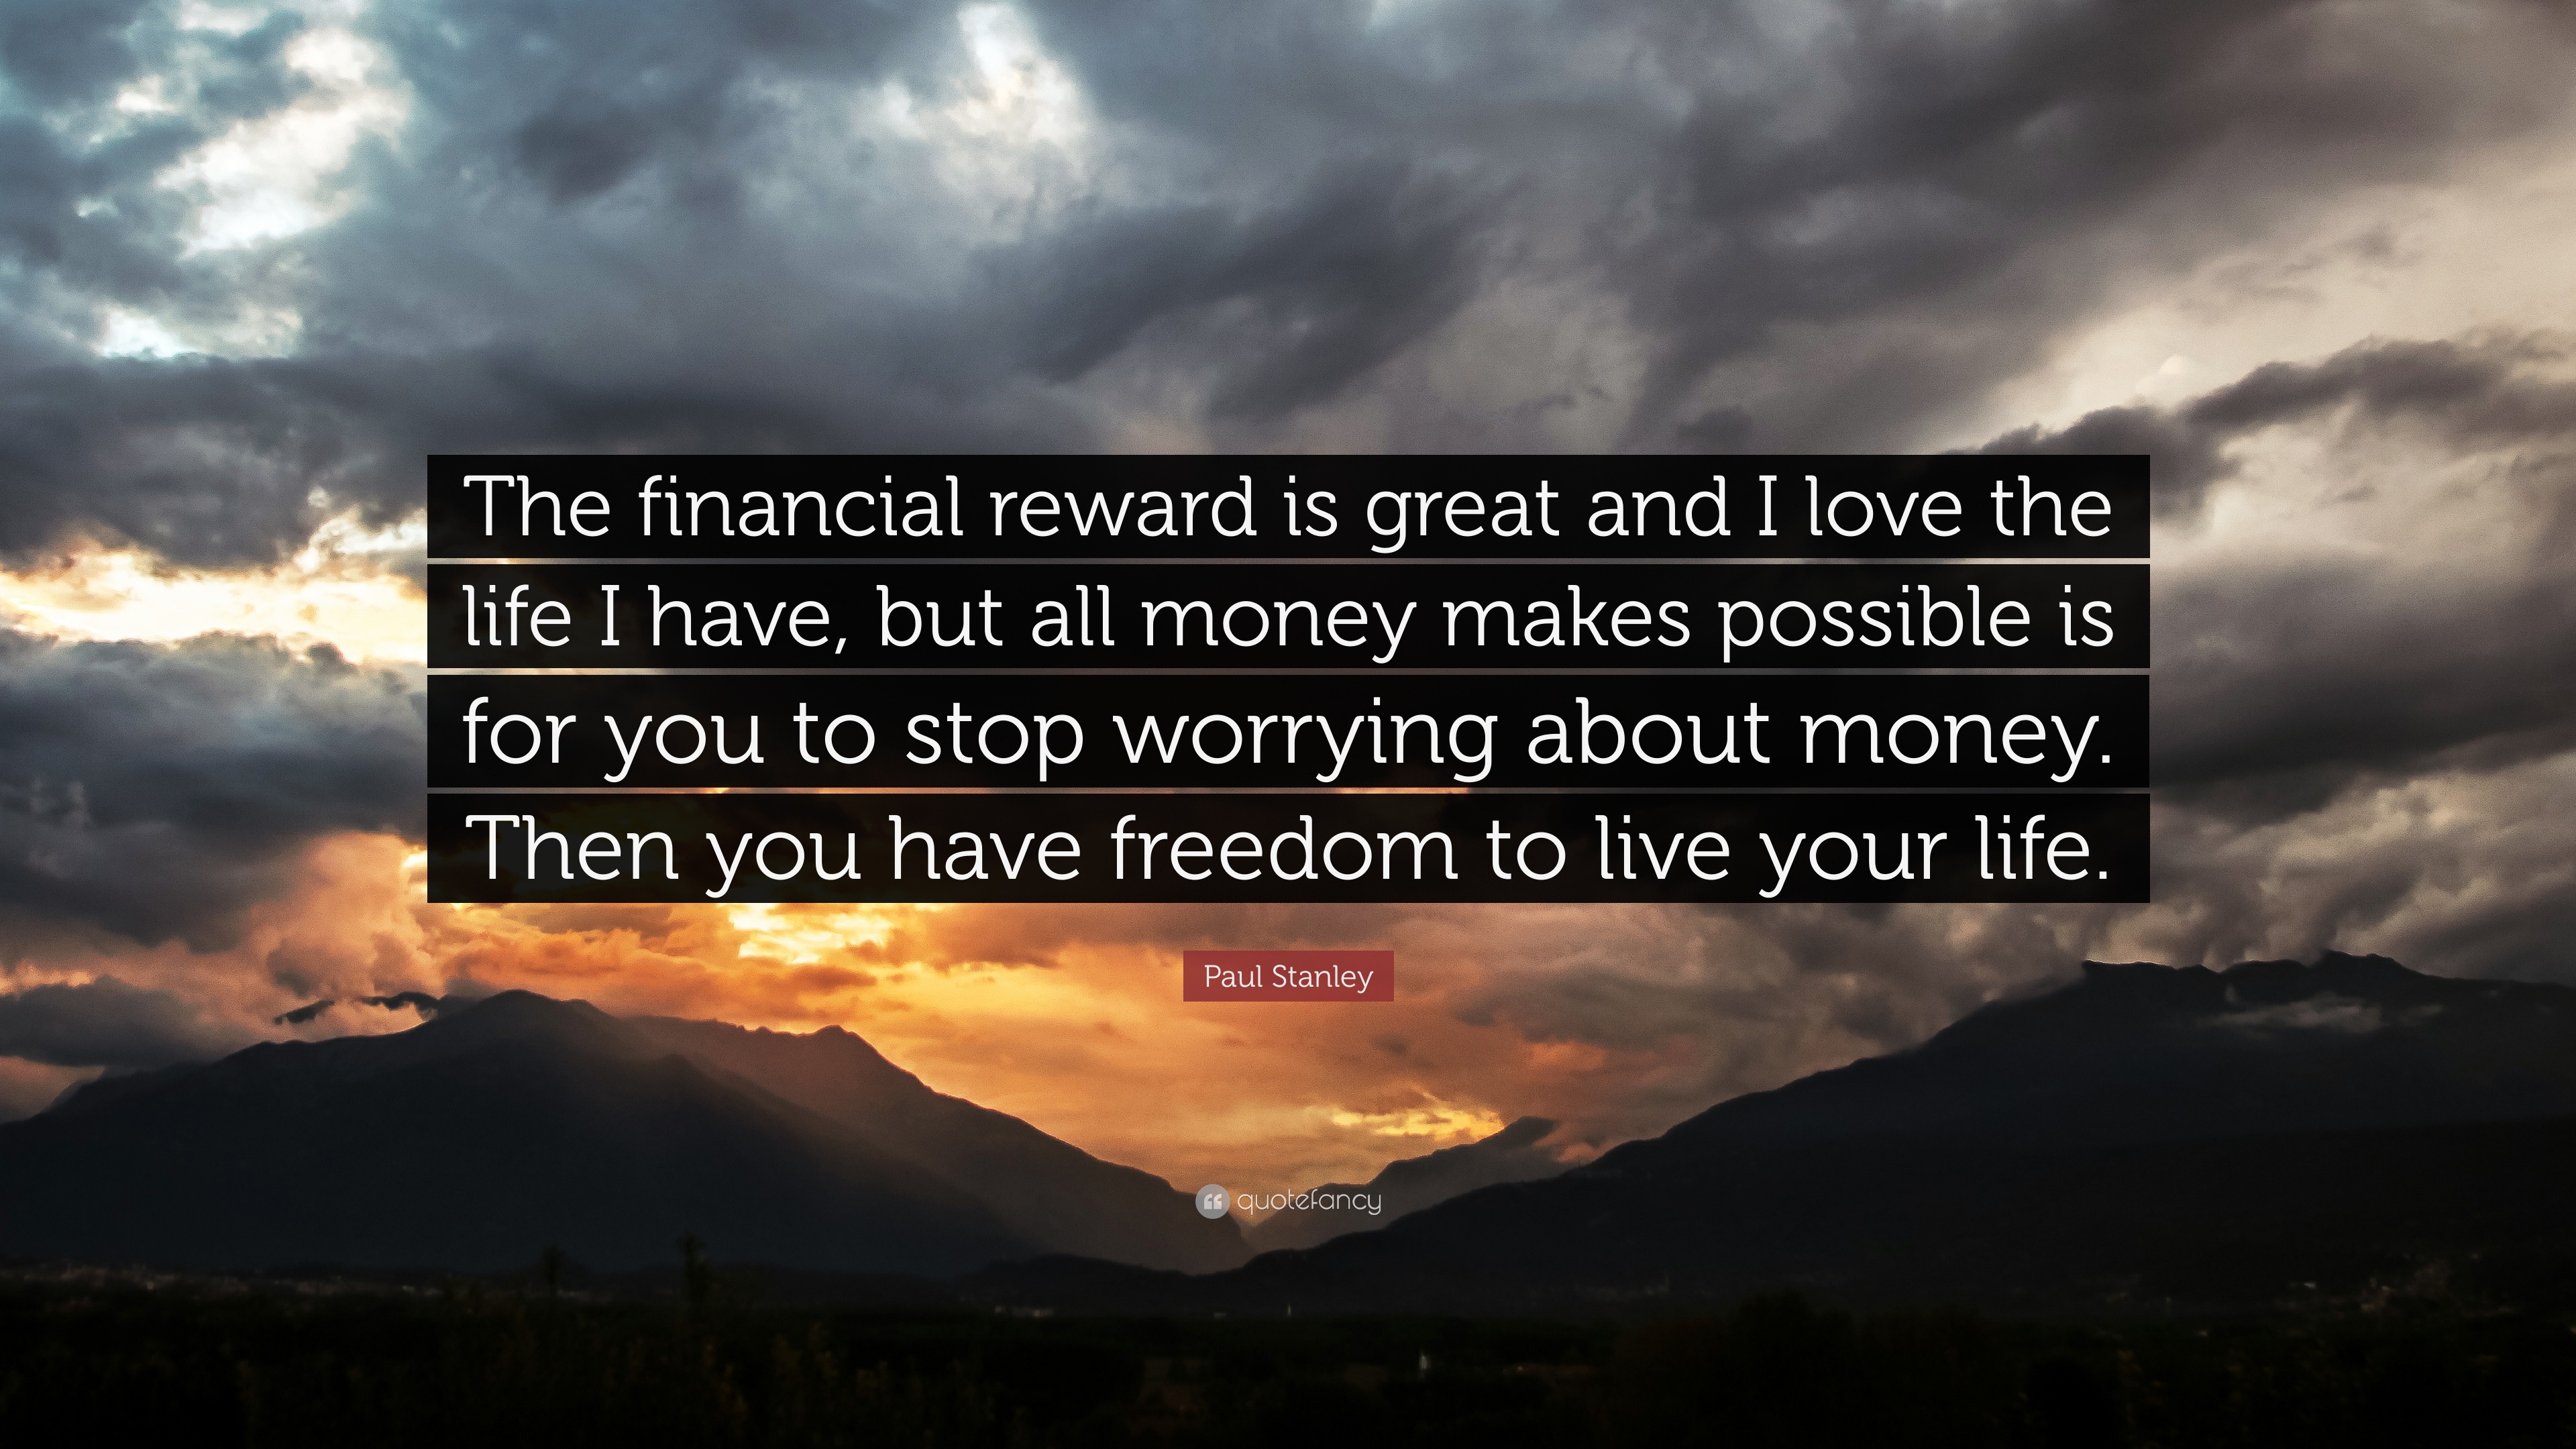 Paul Stanley Quote “The financial reward is great and I love the life I